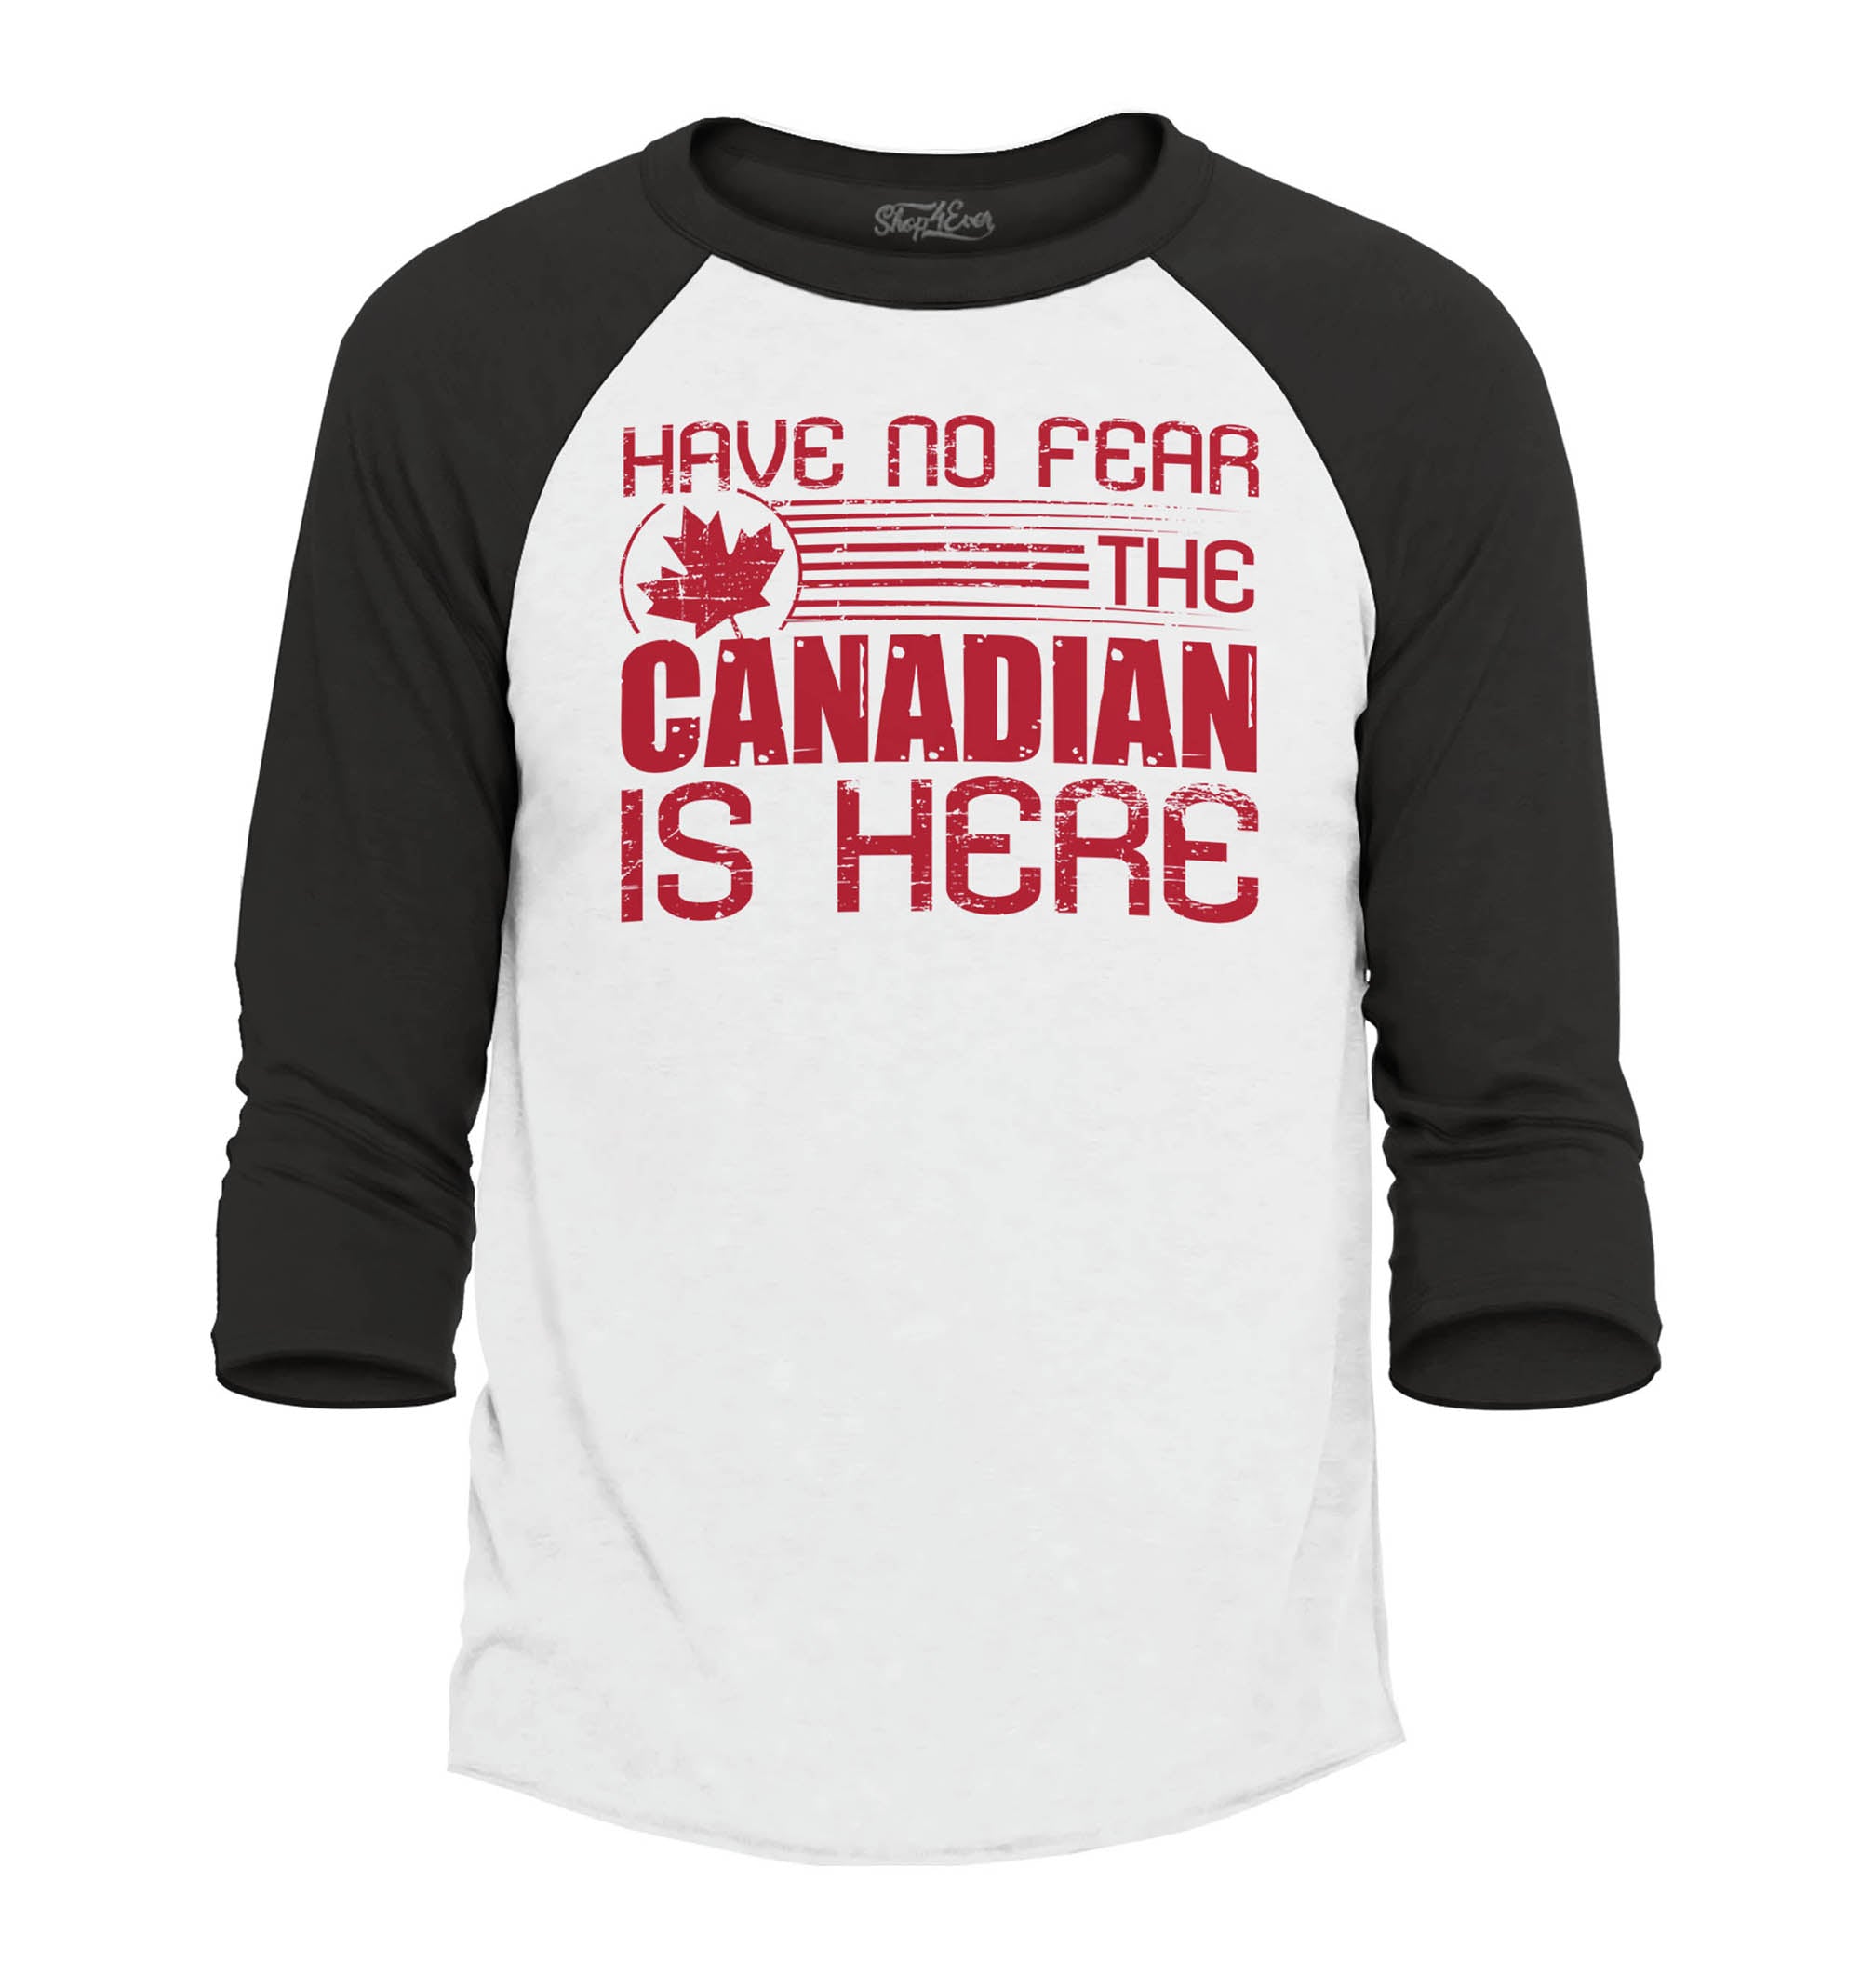 Have No Fear The Canadian is Here Canada Pride Raglan Baseball Shirt